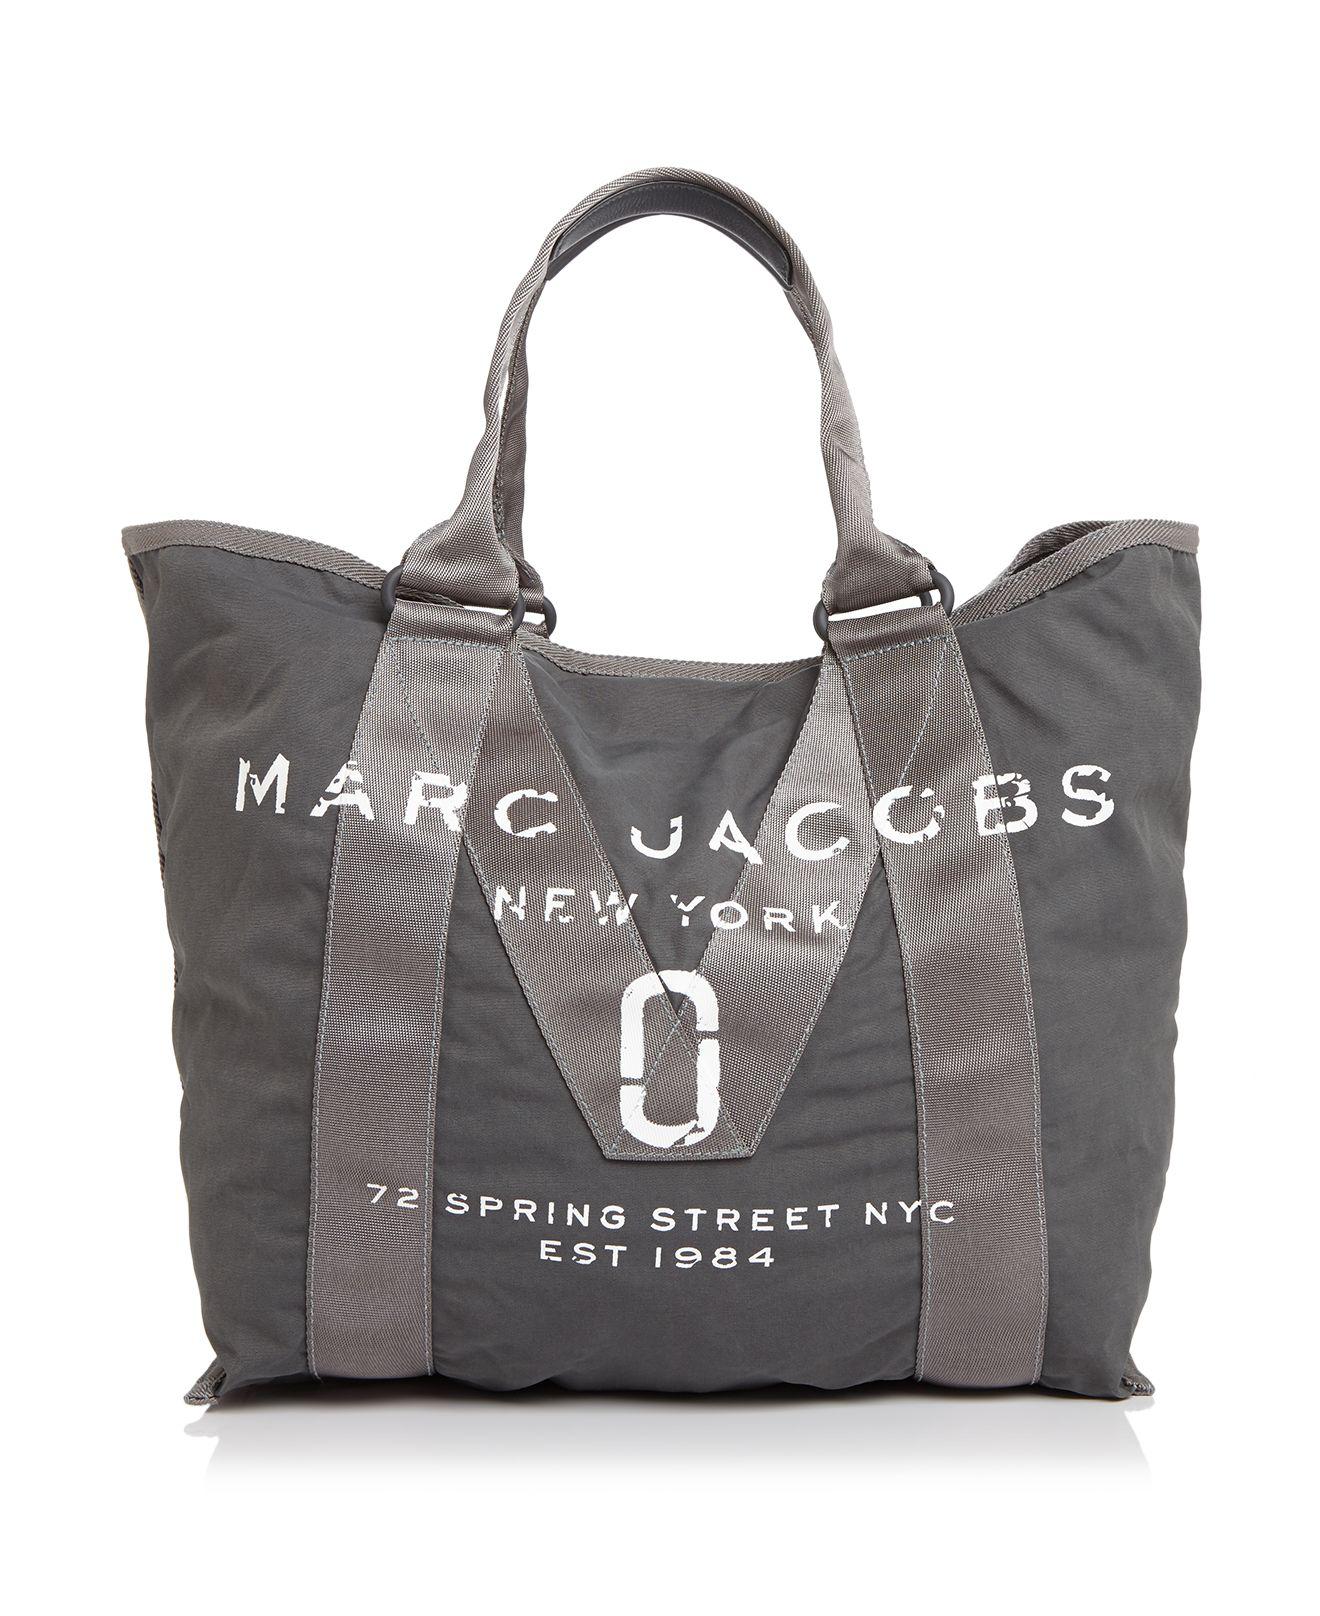 Marc Jacobs Logo Canvas Tote in Black - Lyst